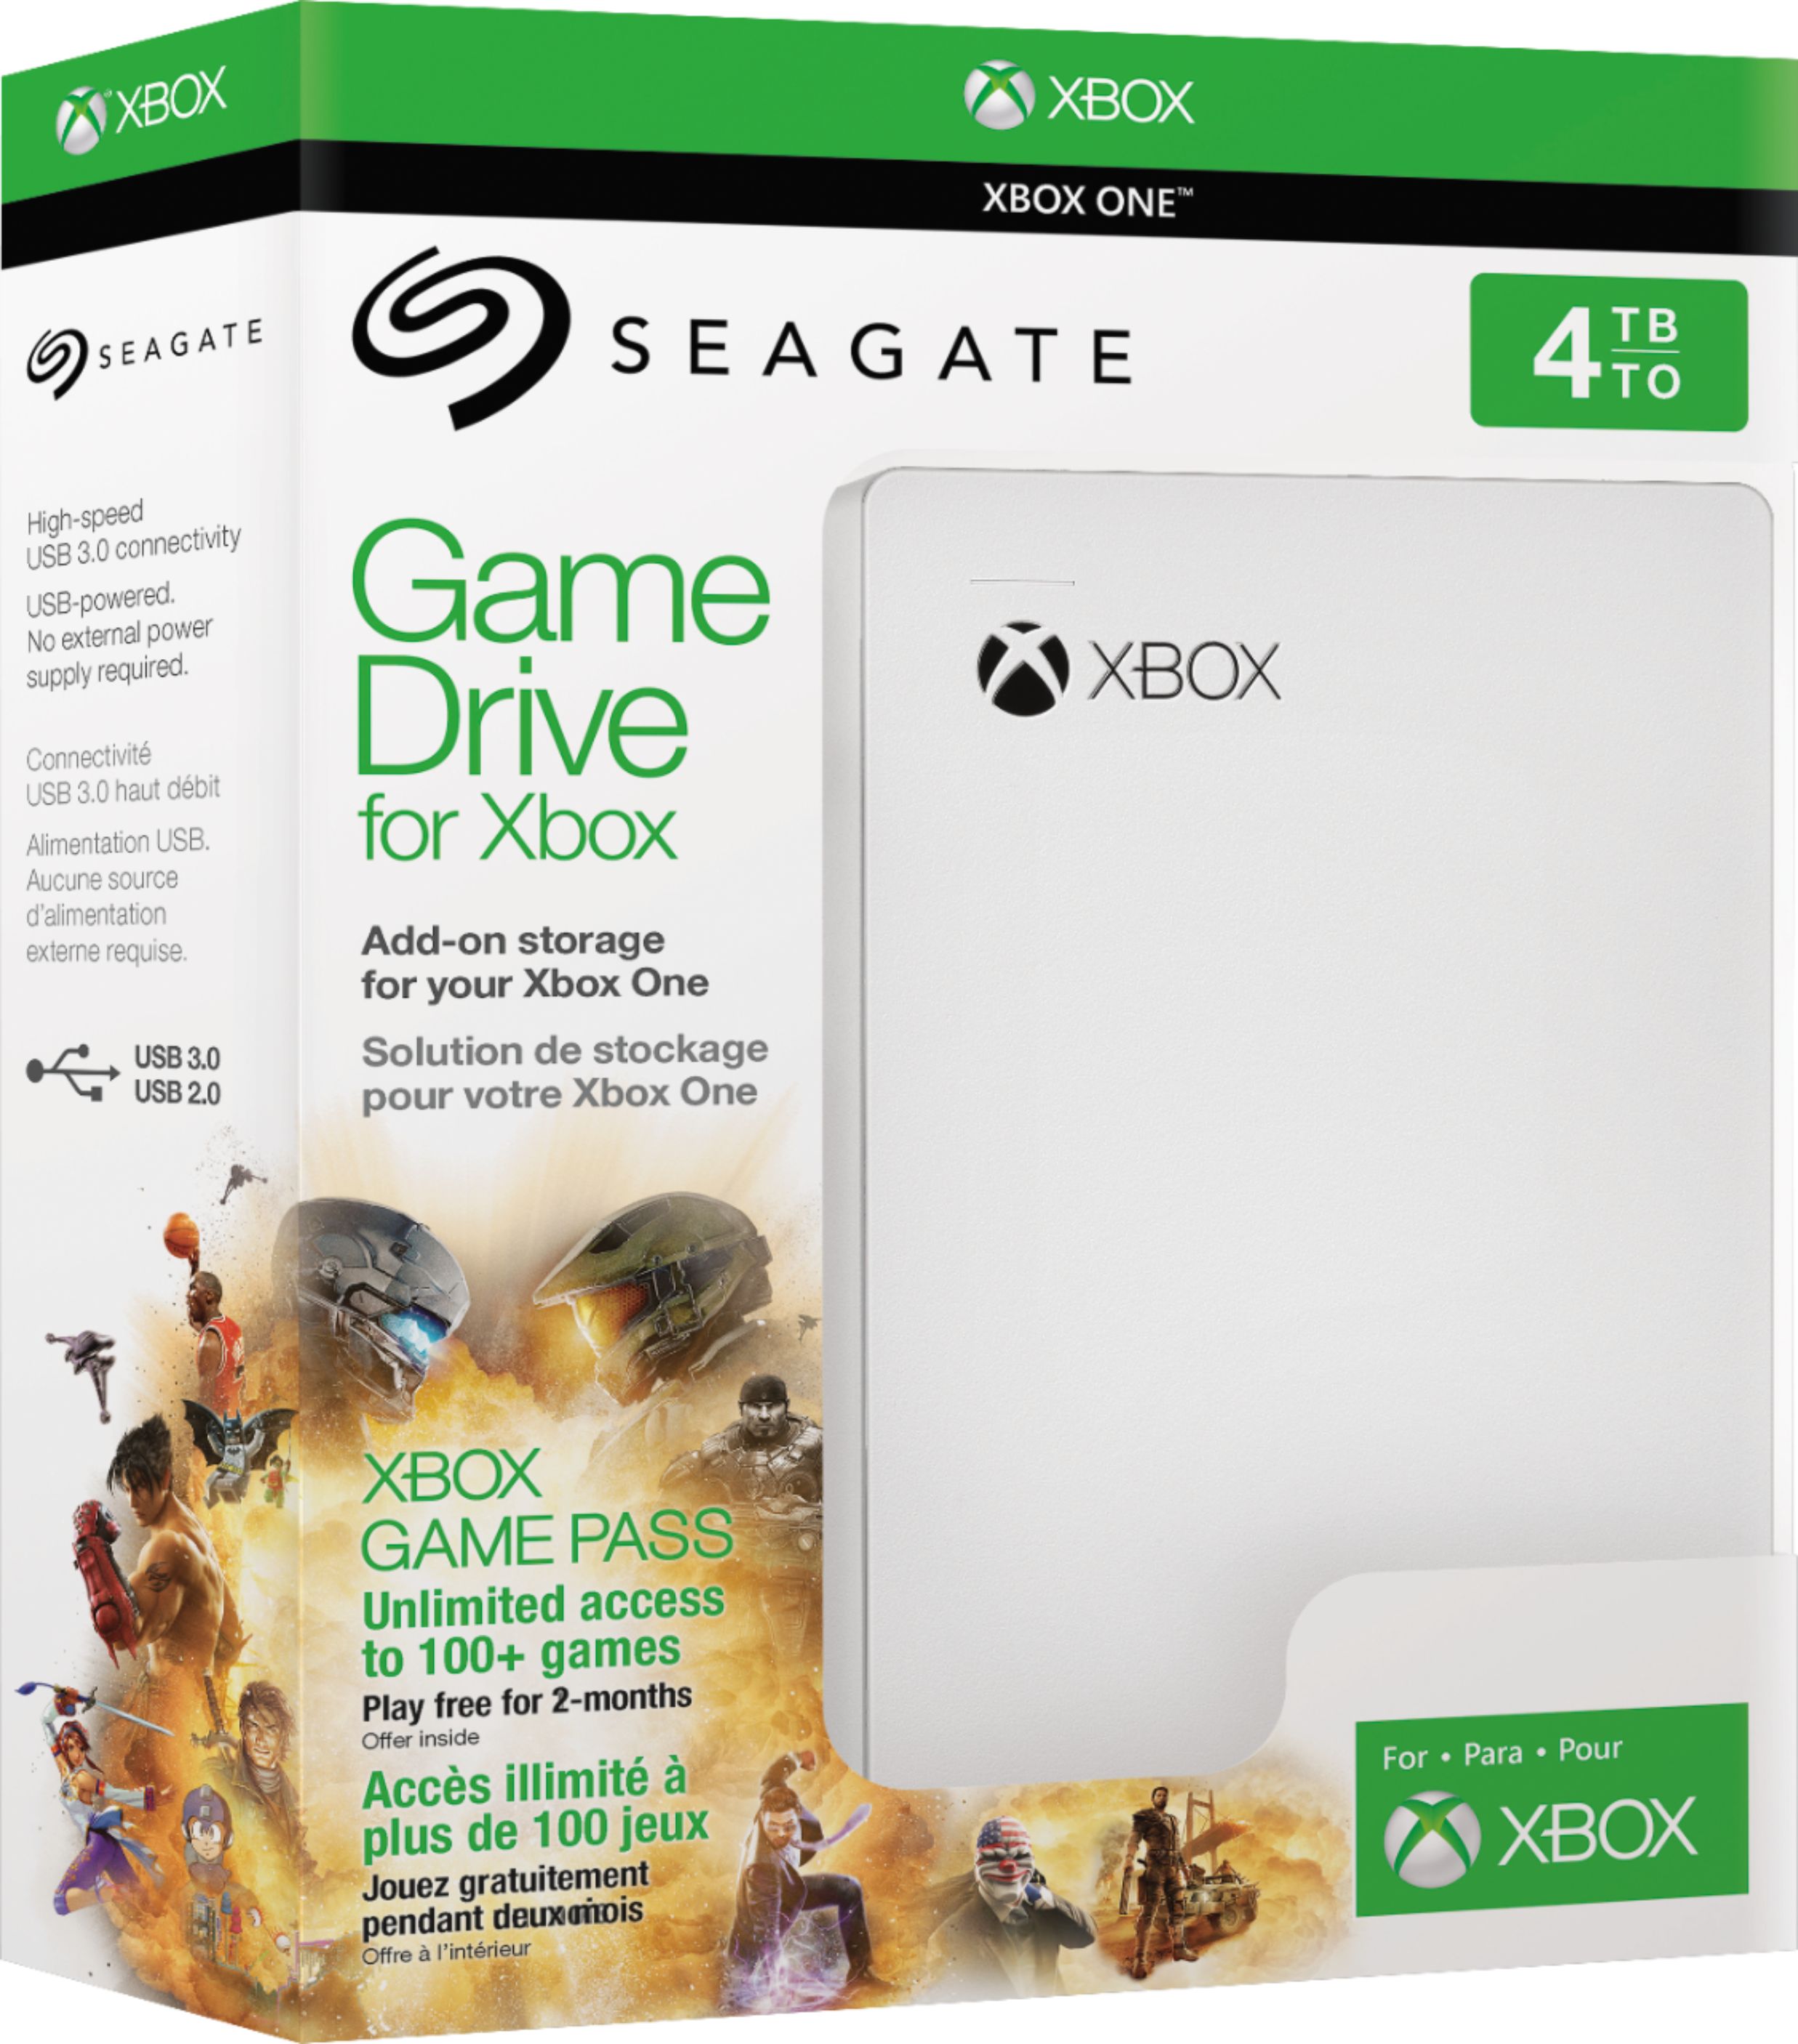 Officially Licensed USB External Buy: Game Drive STEA4000407 Xbox for Best Portable 3.0 White Hard Drive 4TB Seagate